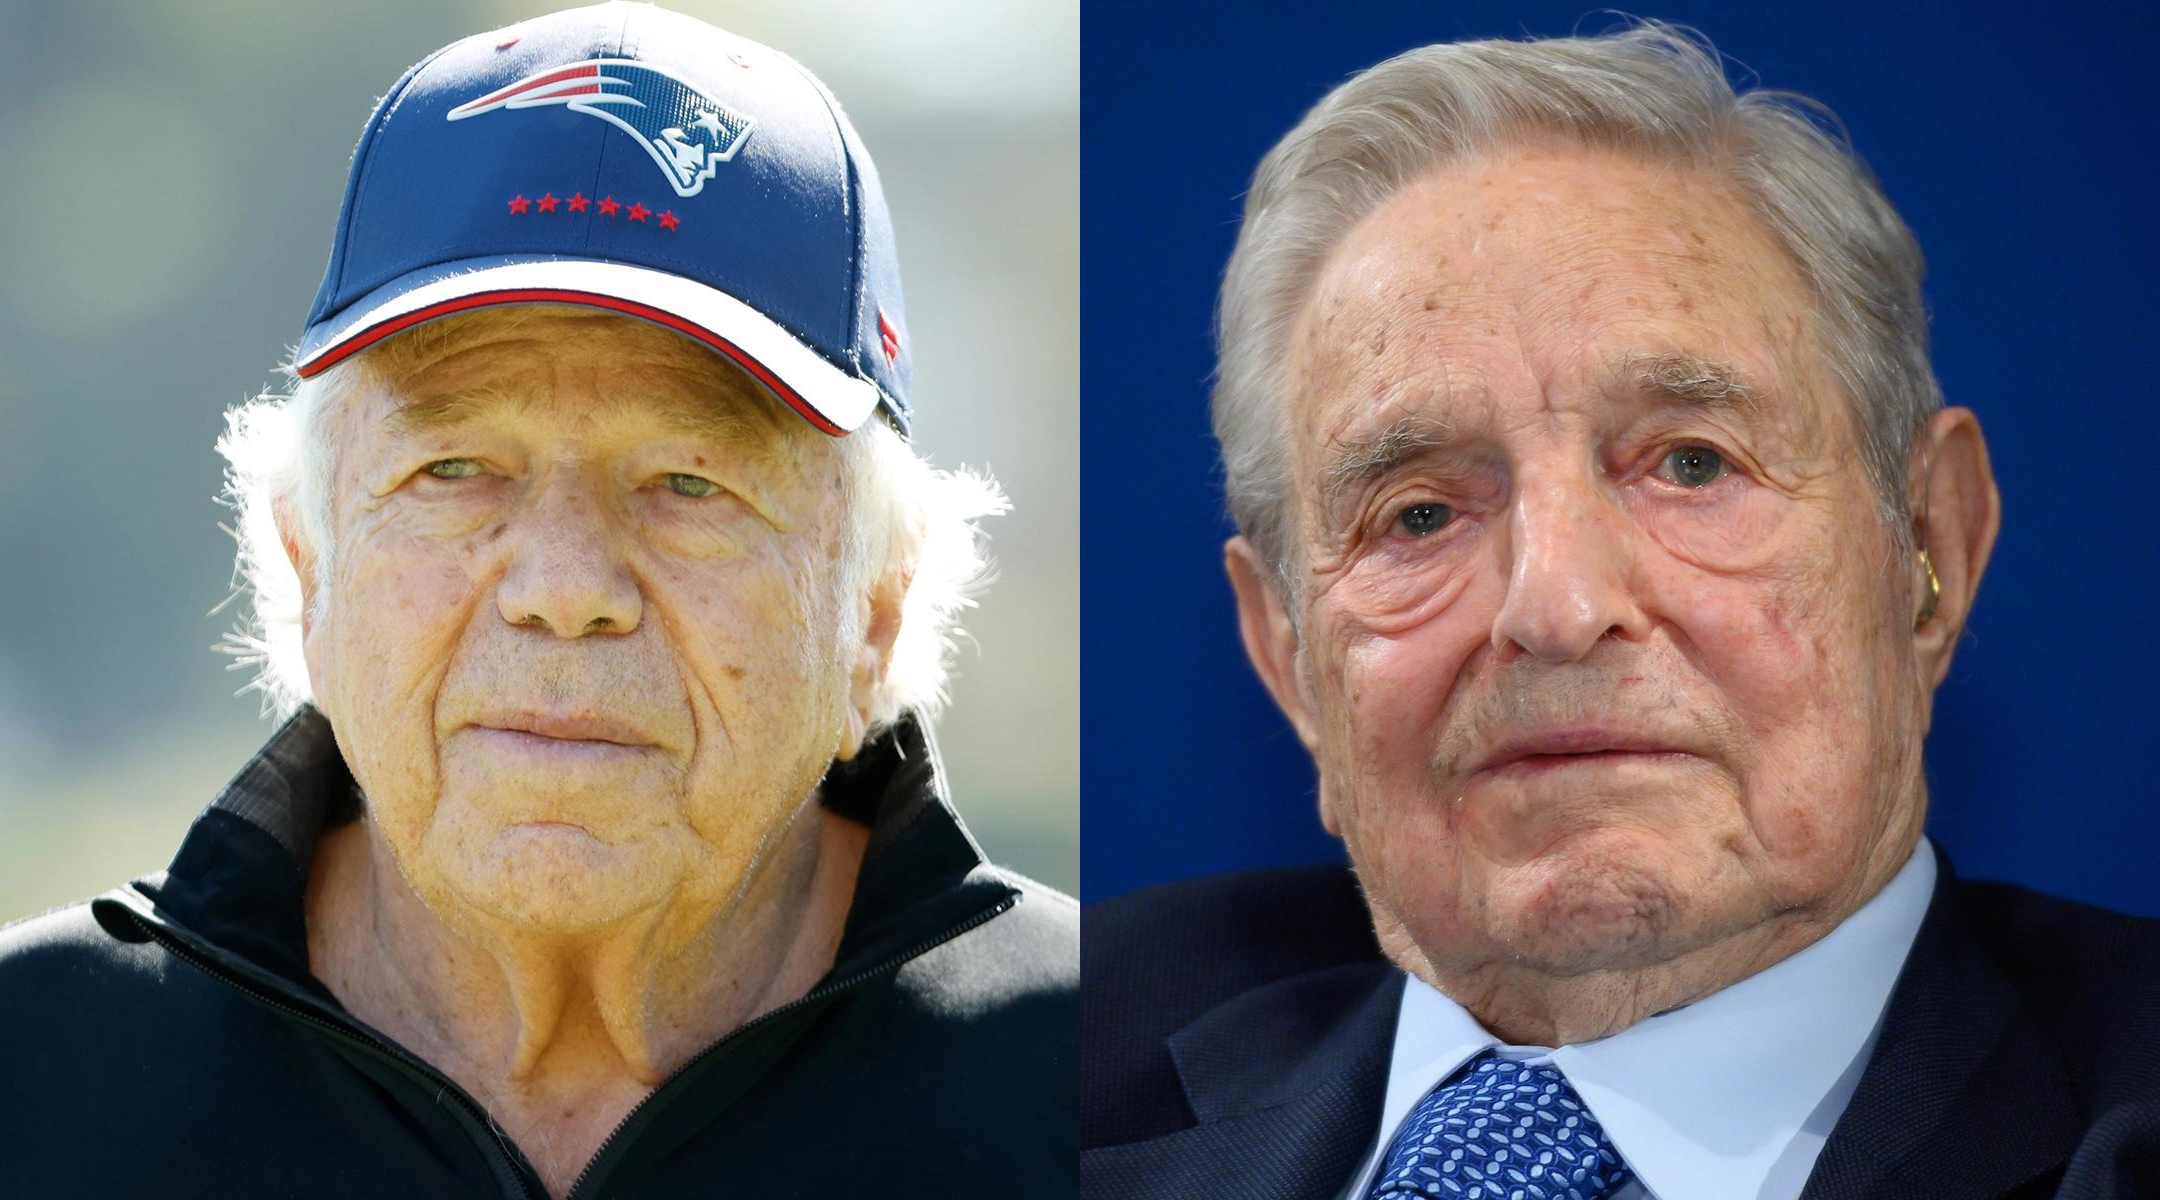 Robert Kraft (L) and George Soros each gave $1 million to pro-Israel PACs in August 2022, according to federal filings. (Cliff Hawkins/Getty Images & Fabrice Coffrini/AFP via Getty Images